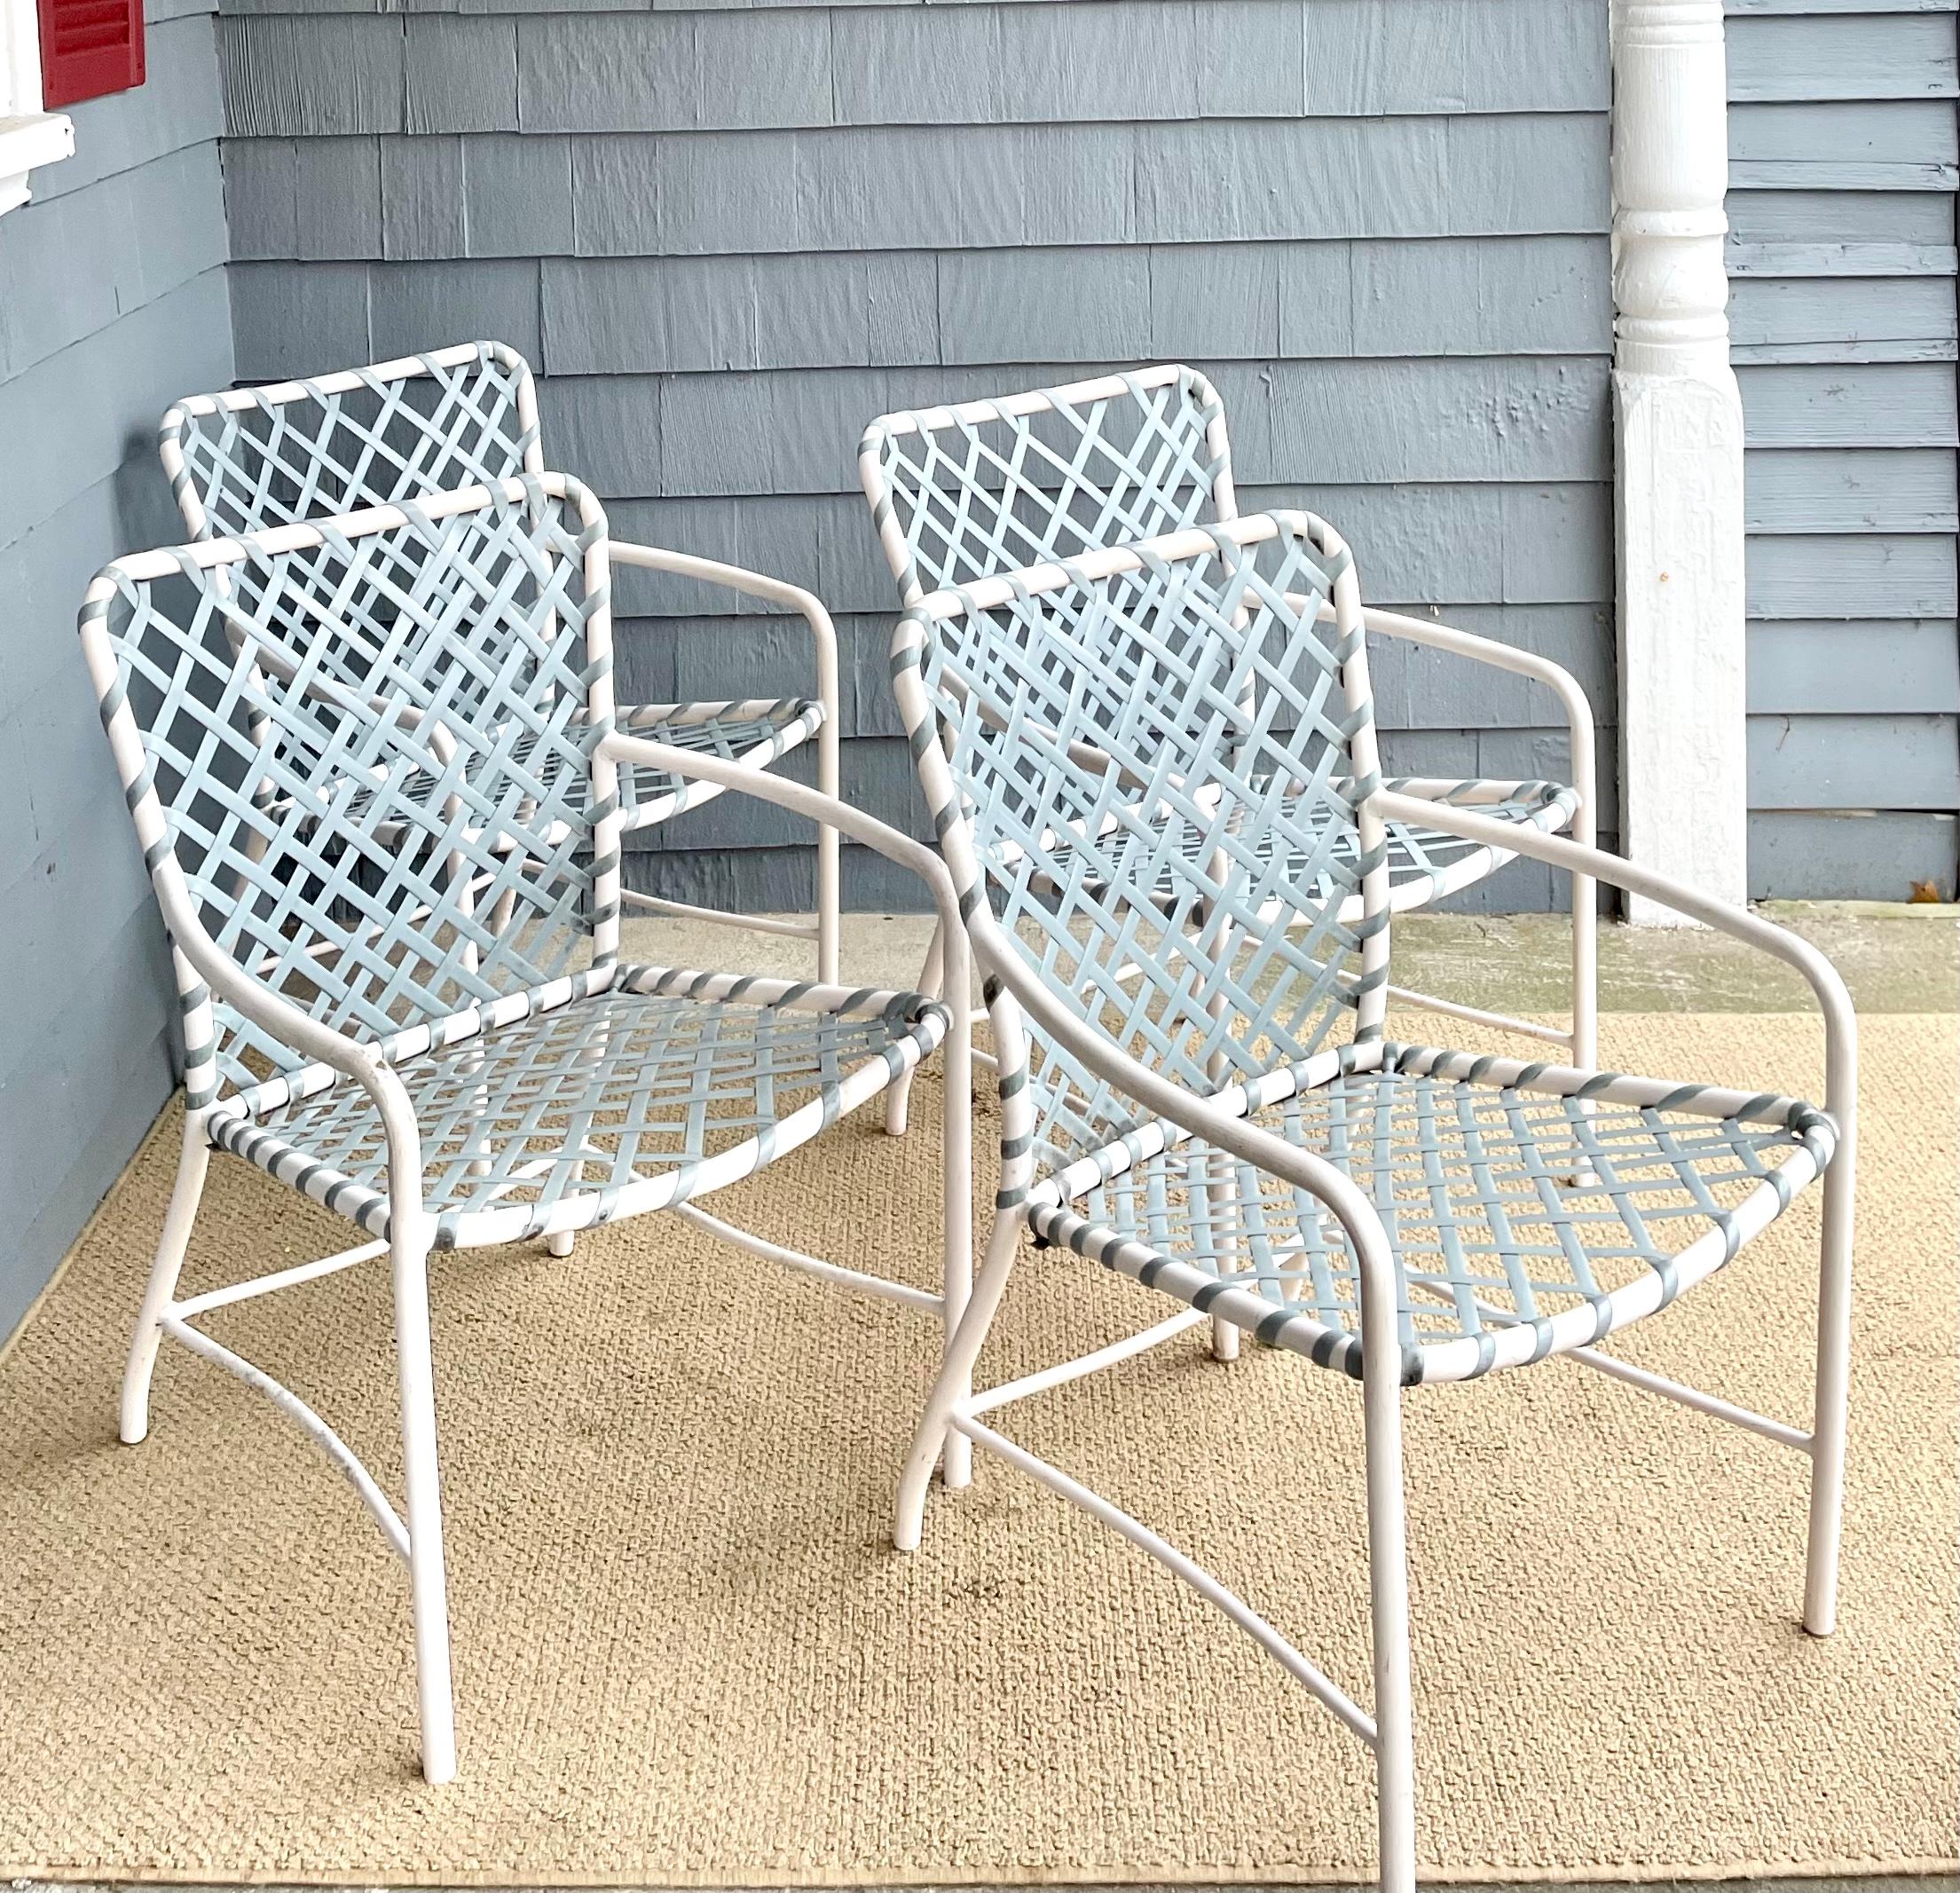 20th Century Vintage Brown Jordan Outdoor Patio Chairs Troptione Strapped 